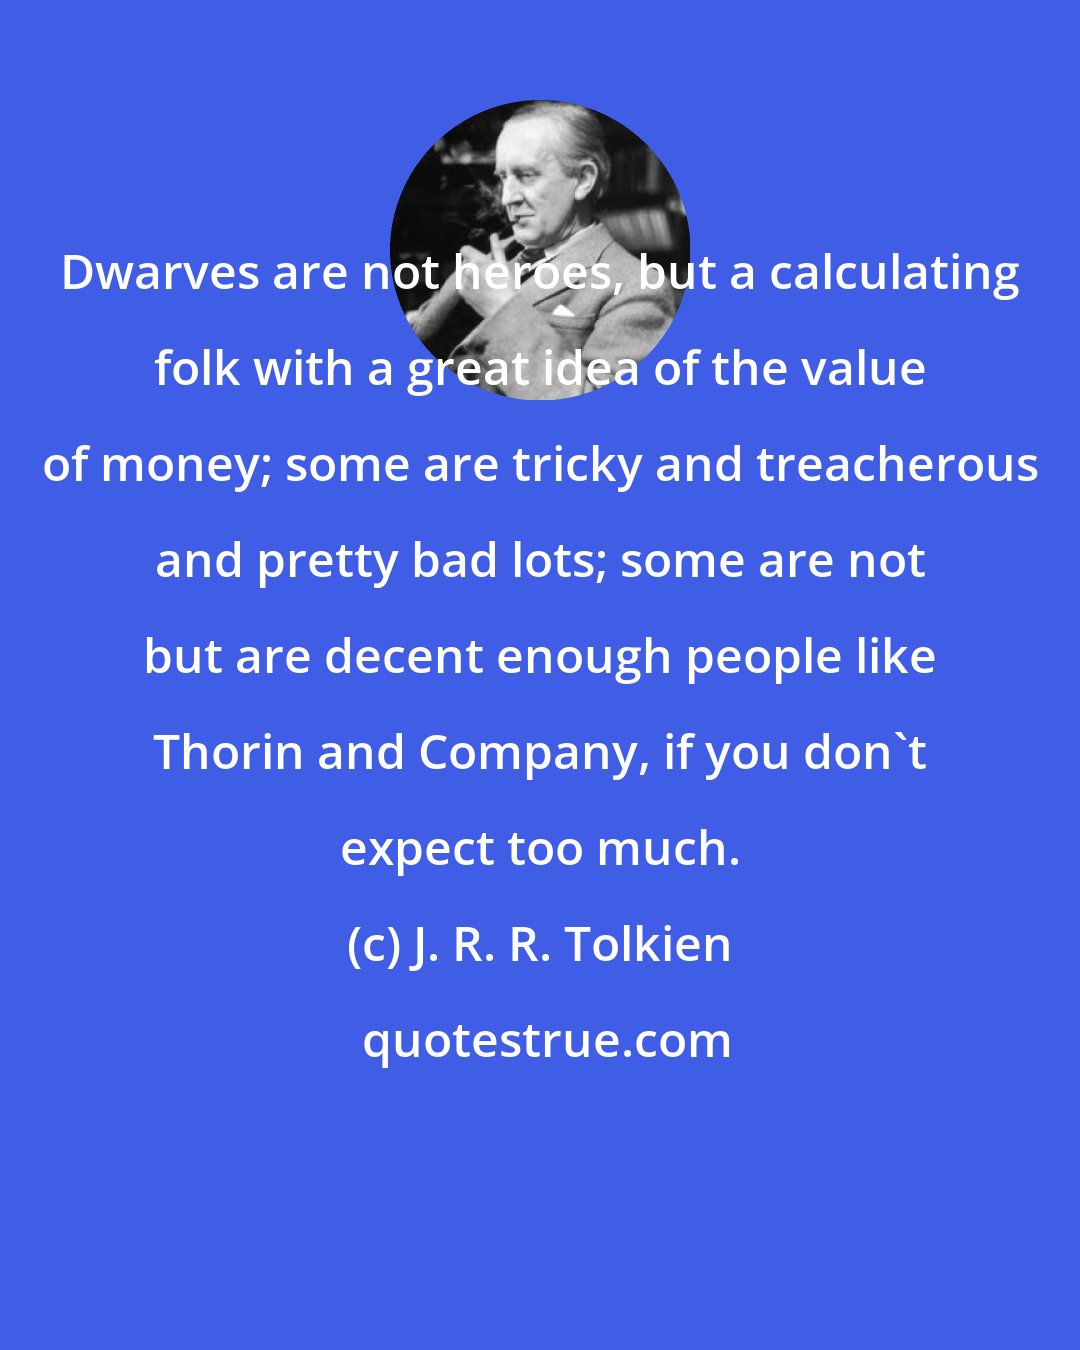 J. R. R. Tolkien: Dwarves are not heroes, but a calculating folk with a great idea of the value of money; some are tricky and treacherous and pretty bad lots; some are not but are decent enough people like Thorin and Company, if you don't expect too much.